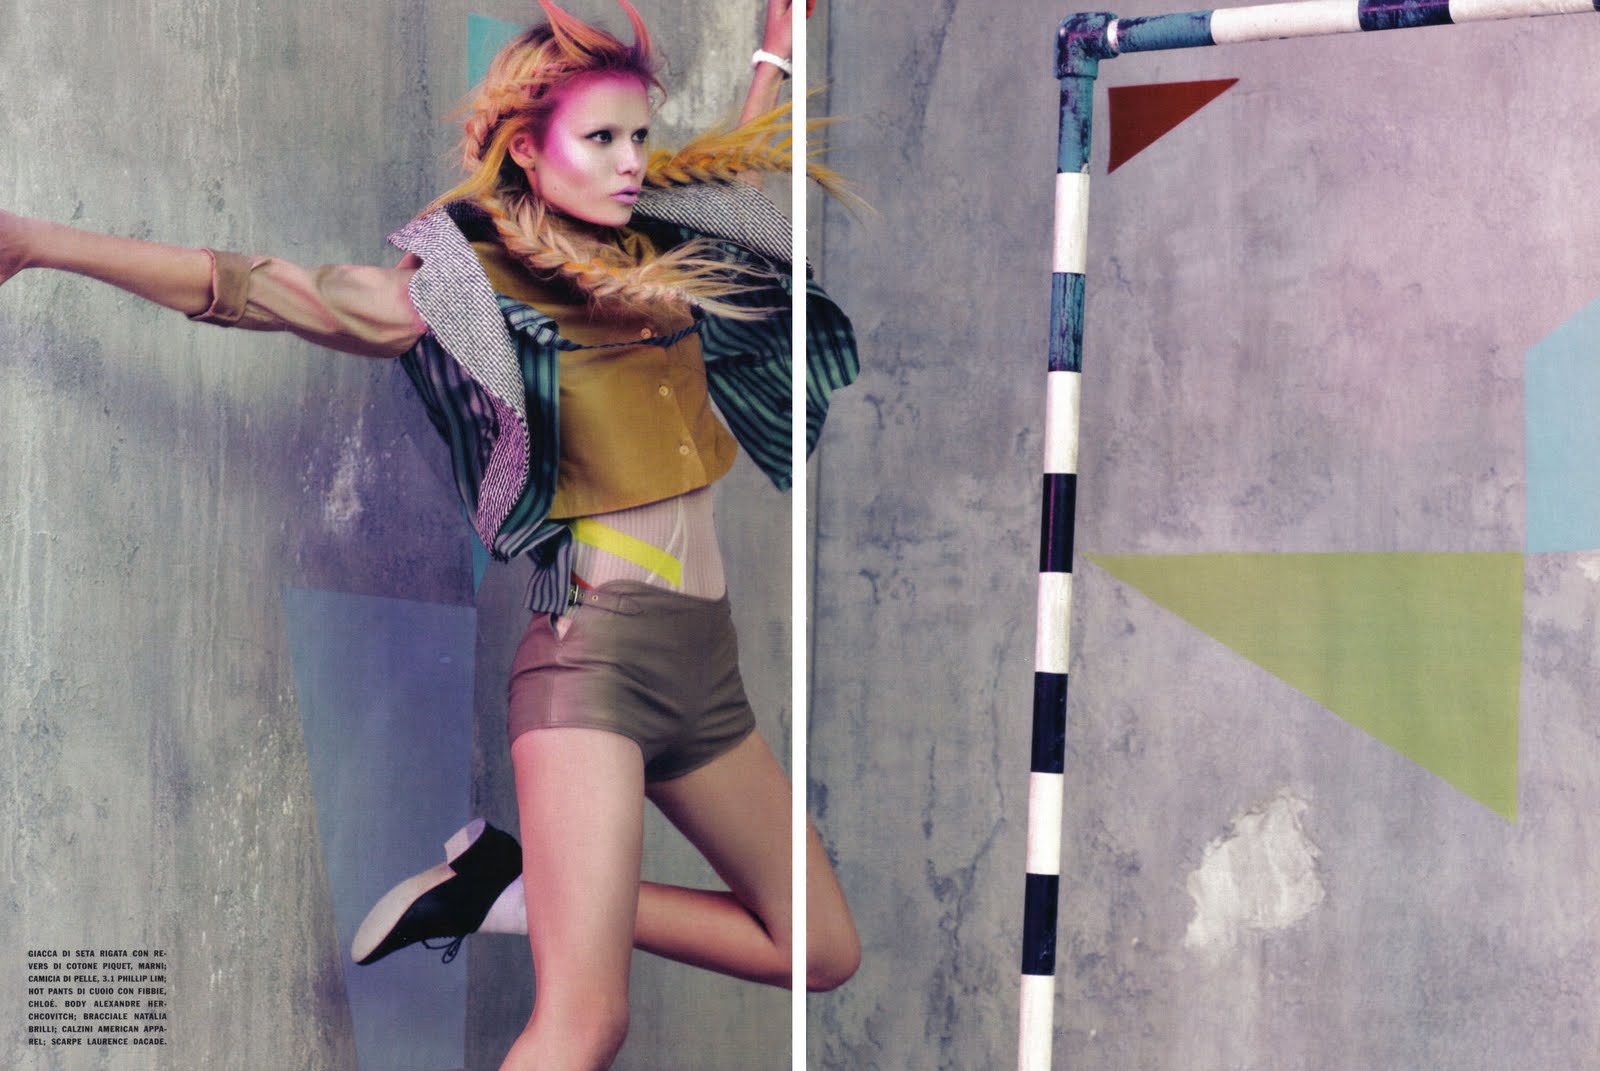 「Glam and Sporty」 Natasha Poly by Craig McDean / VOGUE Italia March 2010